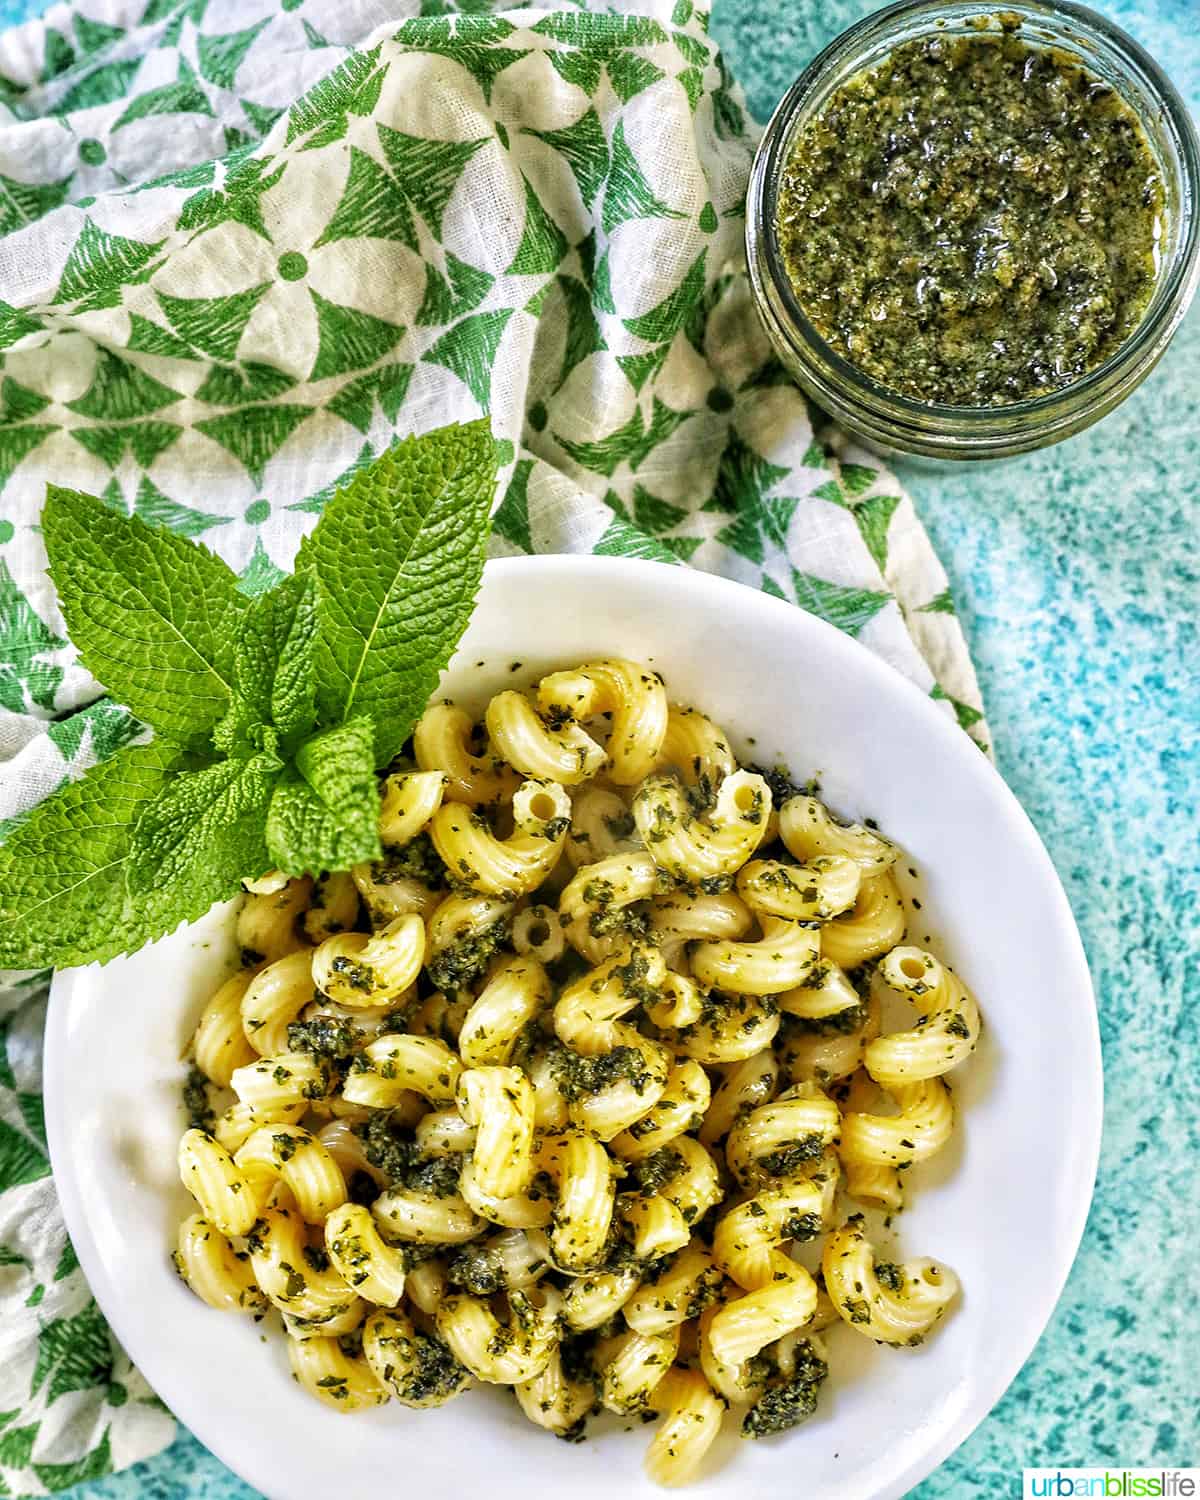 pesto pasta in a white bowl on blue background with a side of pesto pasta in a jar.